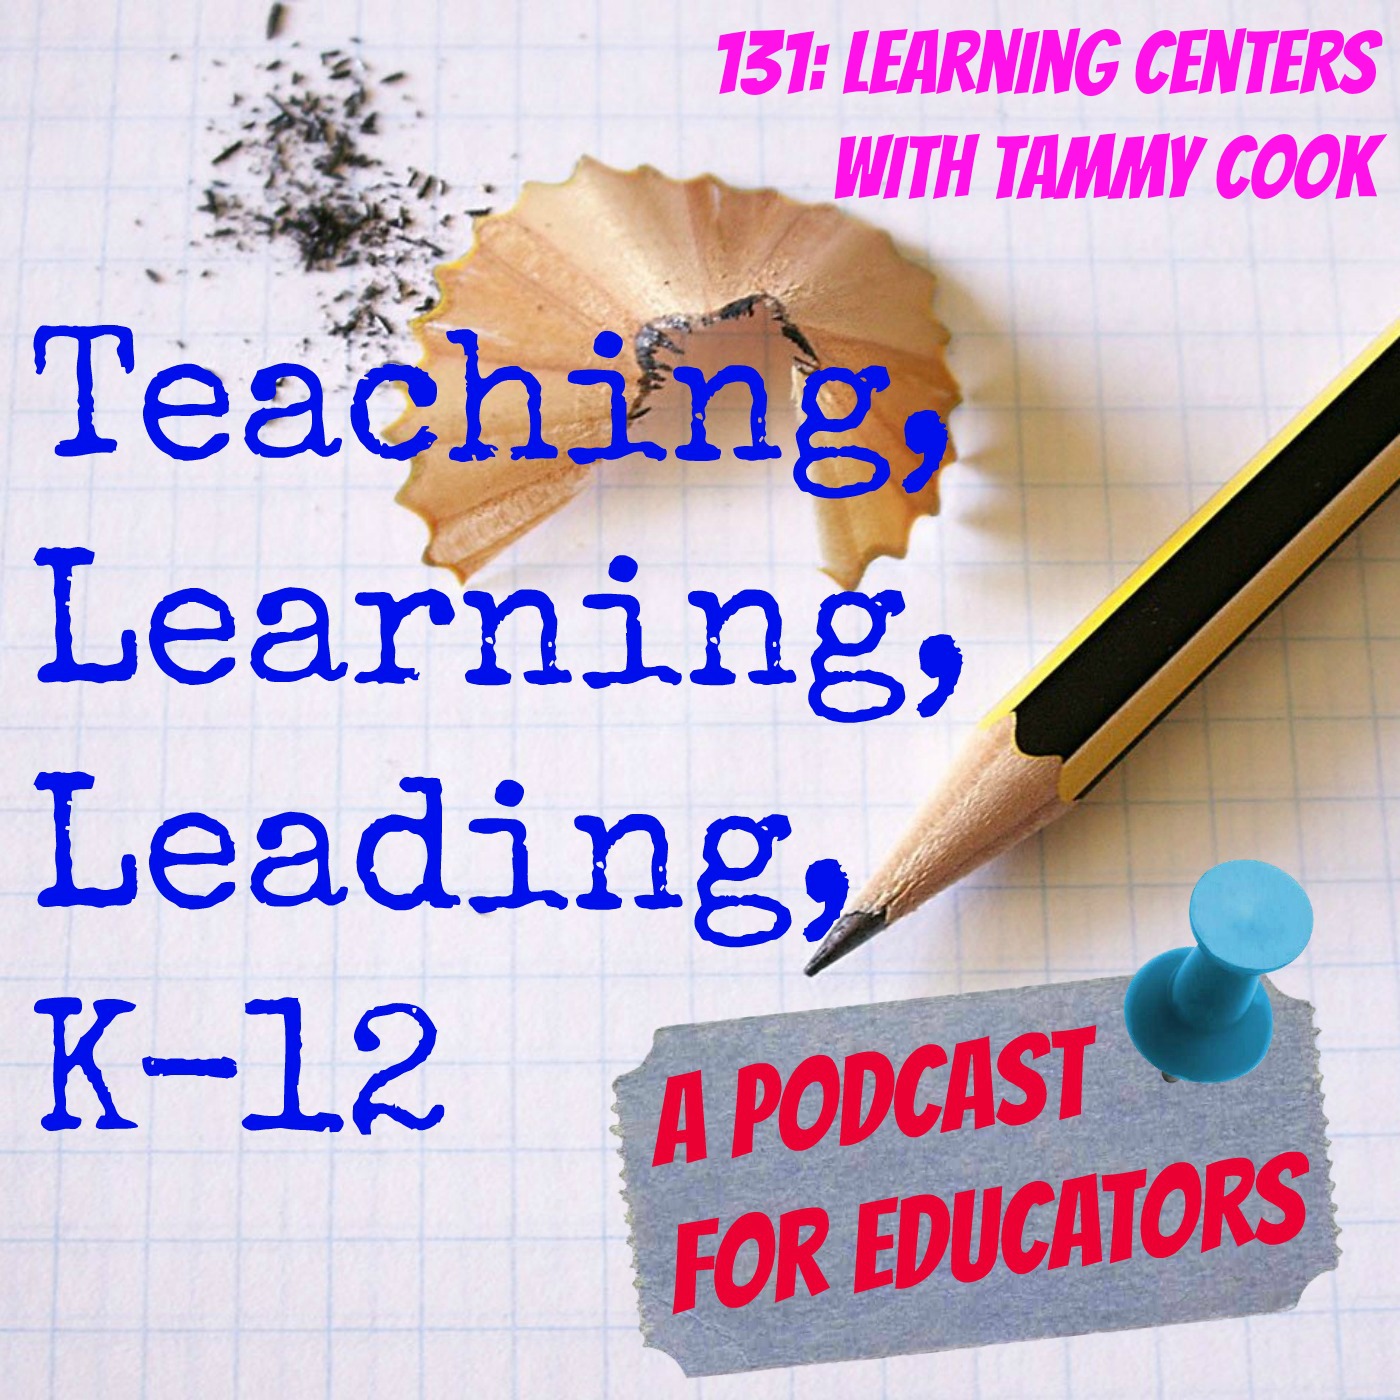 131: Learning Centers with Tammy Cook Image